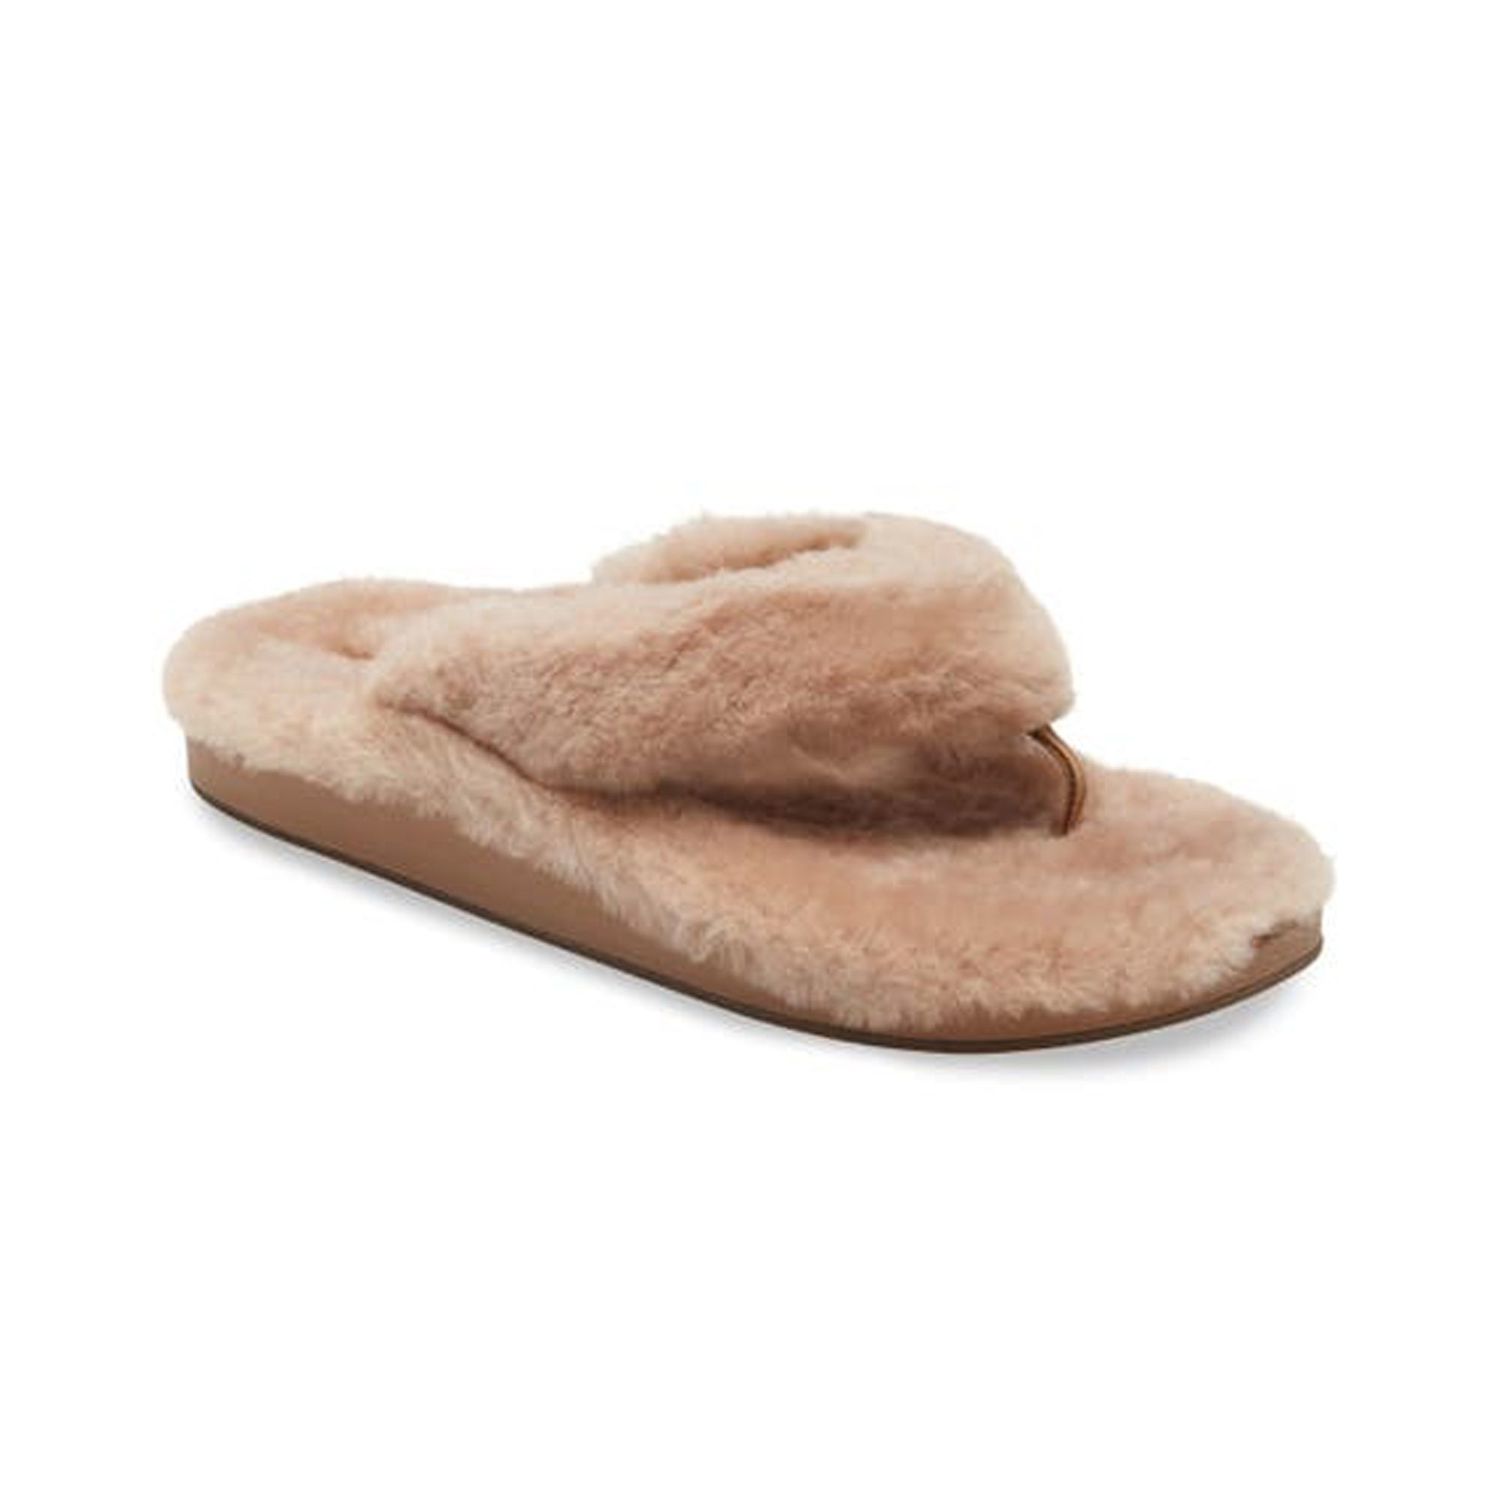 Product image of house slippers on a white background